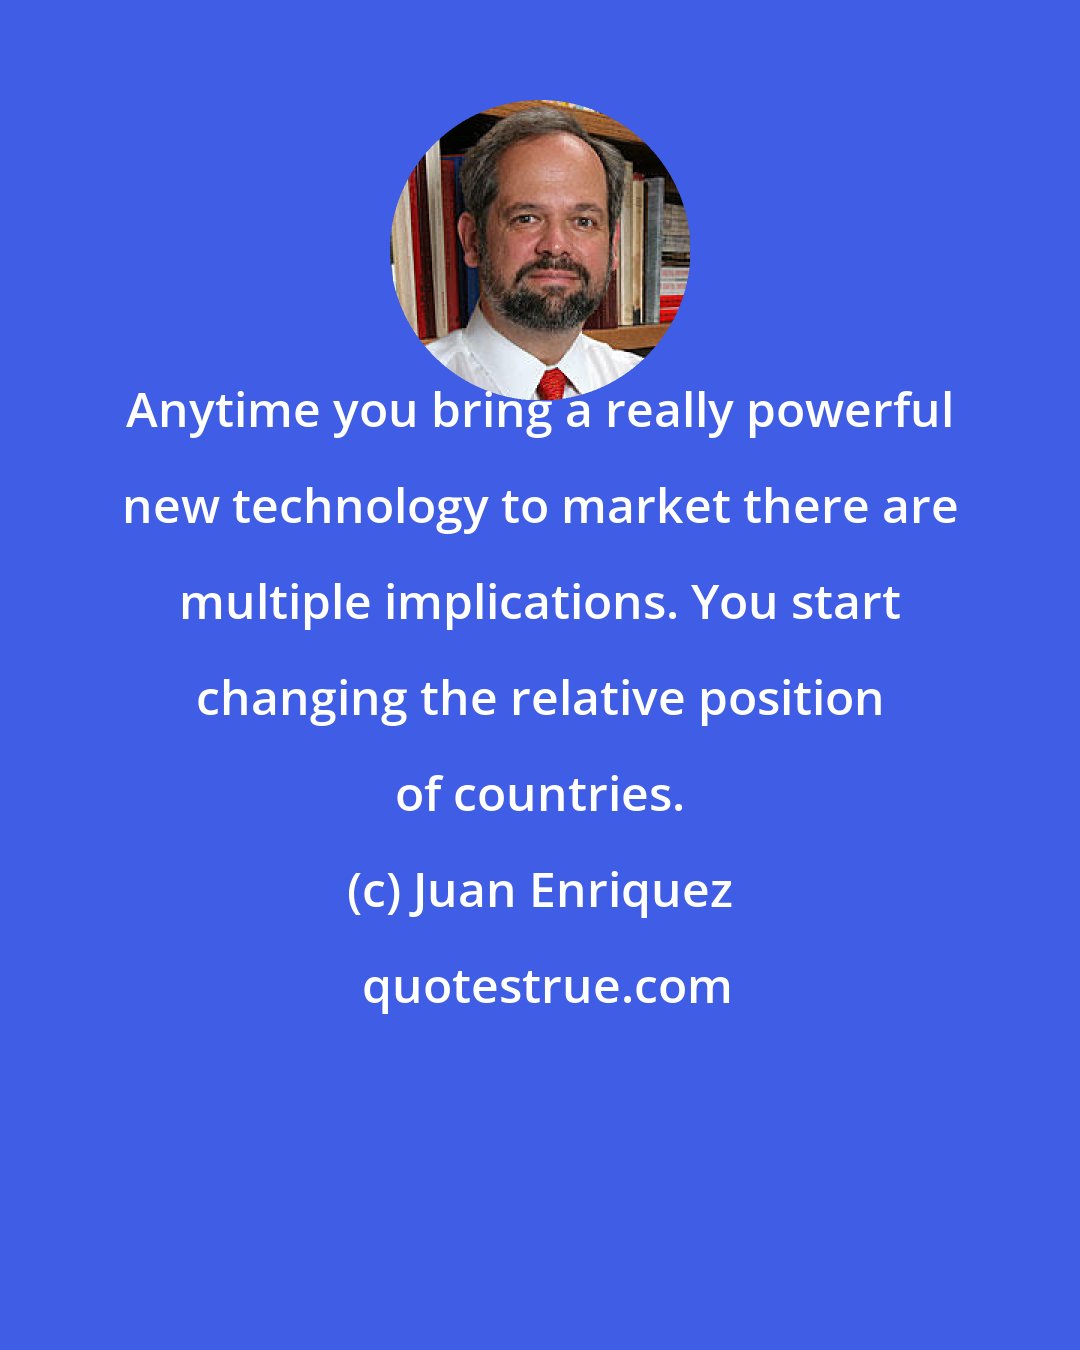 Juan Enriquez: Anytime you bring a really powerful new technology to market there are multiple implications. You start changing the relative position of countries.